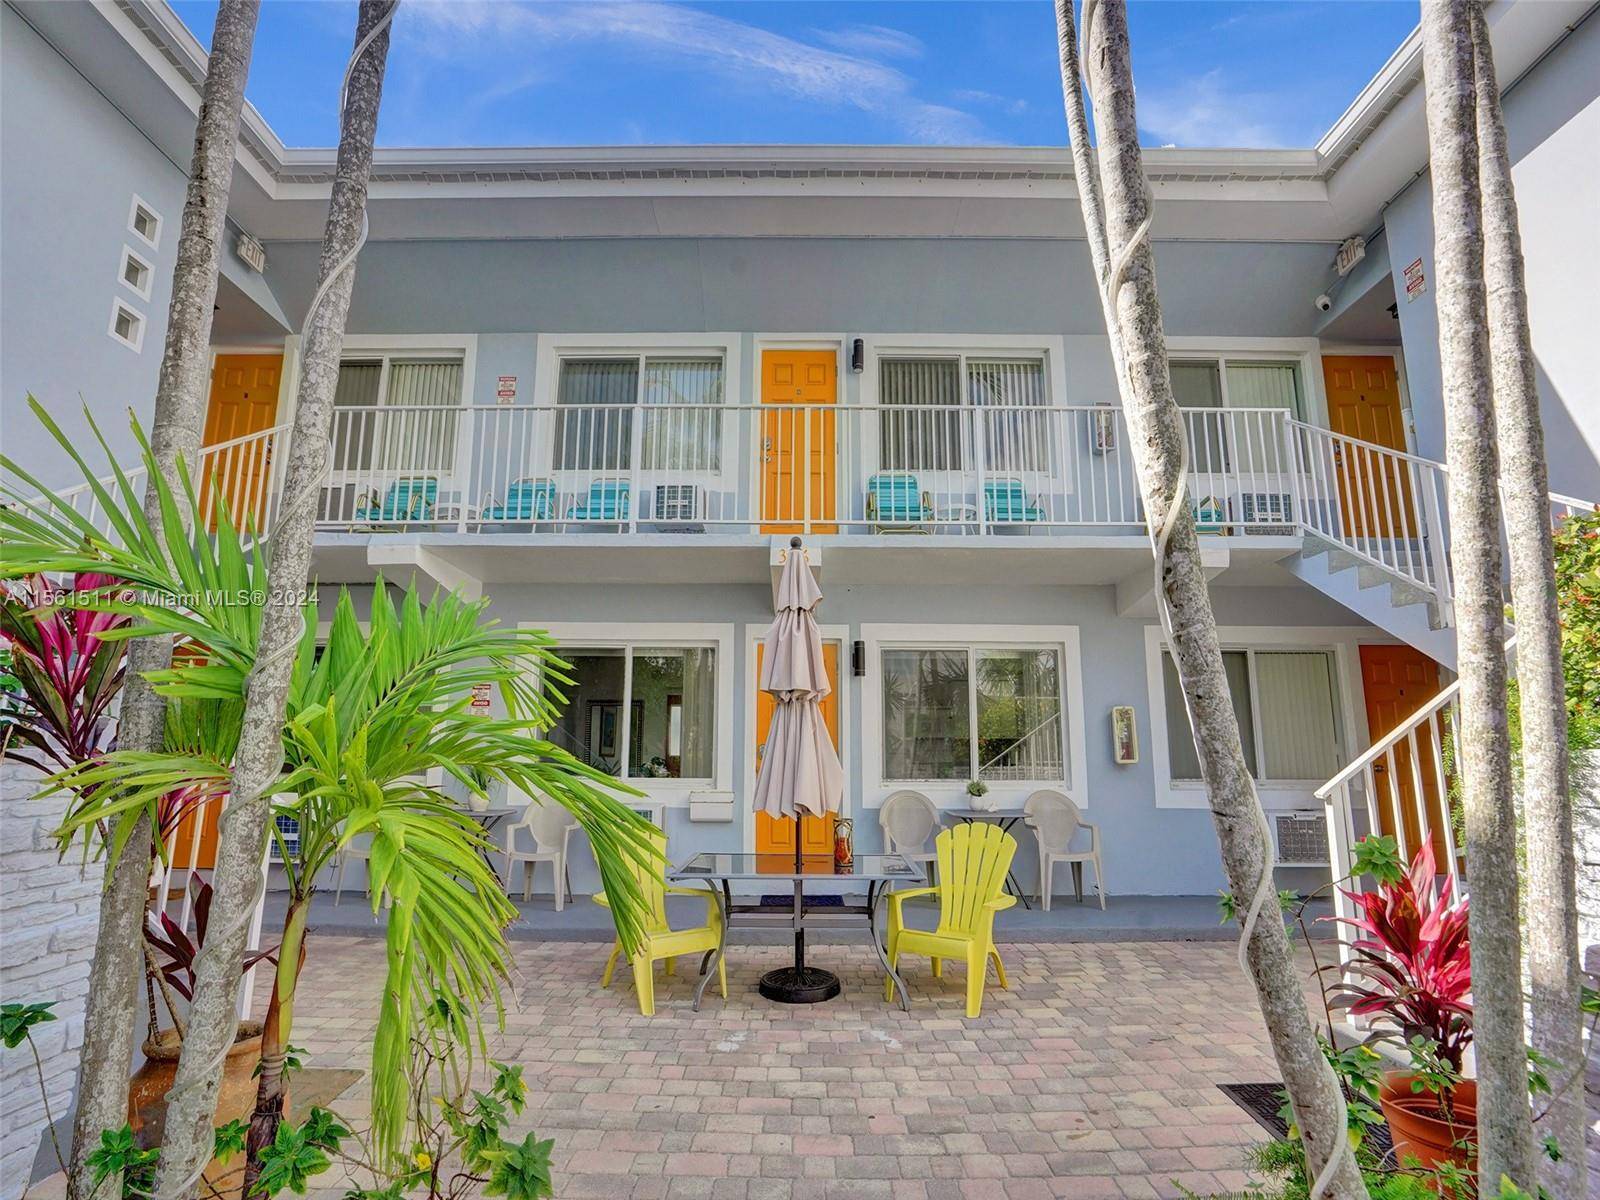 A Tropical Oasis, The Beach Tides Hotel located east of A1A in Hollywood Beach, has 11 rooms ; 5 Suites, 5 Studios, all w full kitchens, 1 std.